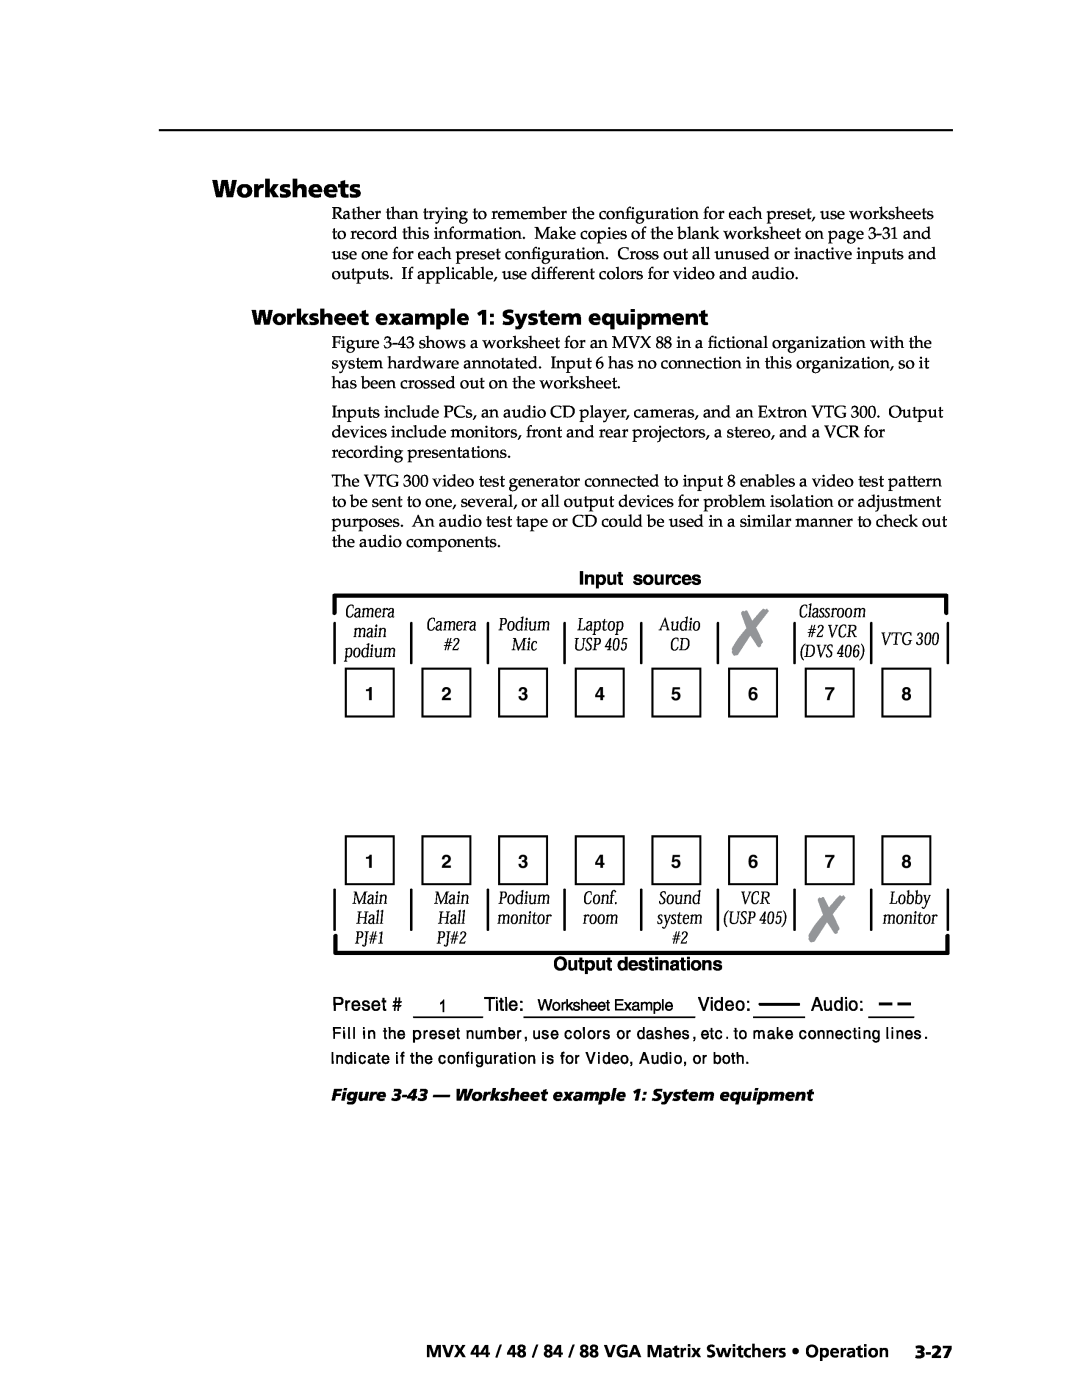 Extron electronic MVX 88 Series Worksheets, Sound, system, Worksheet example 1 System equipment, Input sources, Camera 